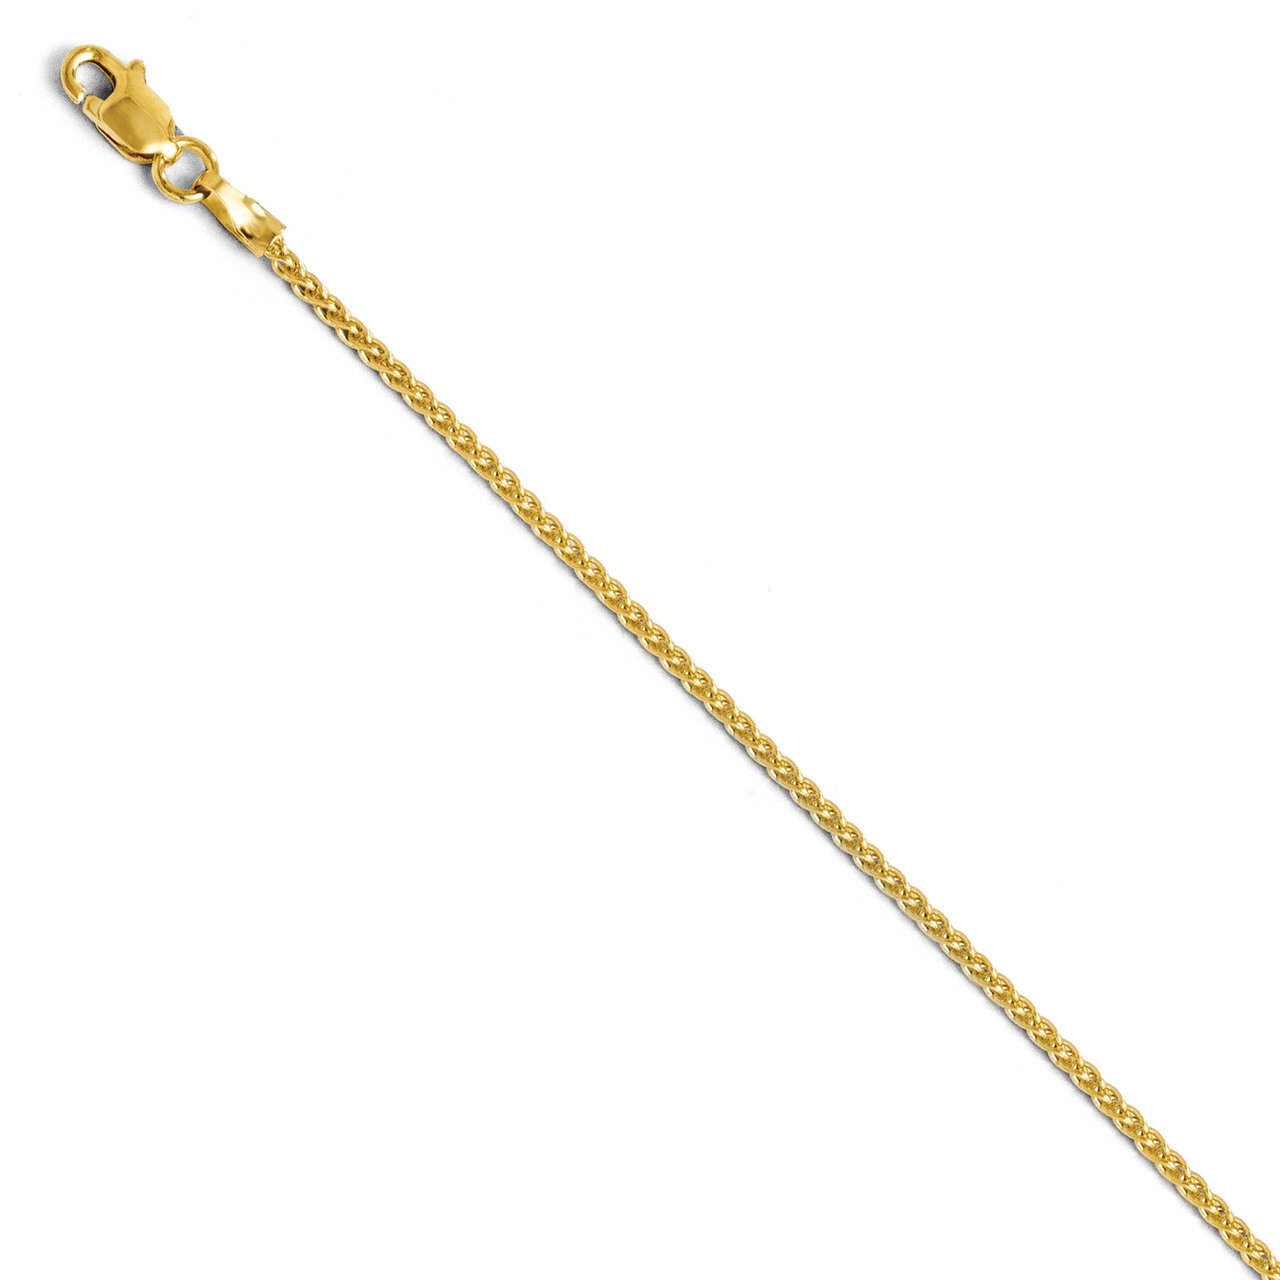 1.5mm Wheat Anklet Chain 10 Inch - 14k Gold HB-595-10